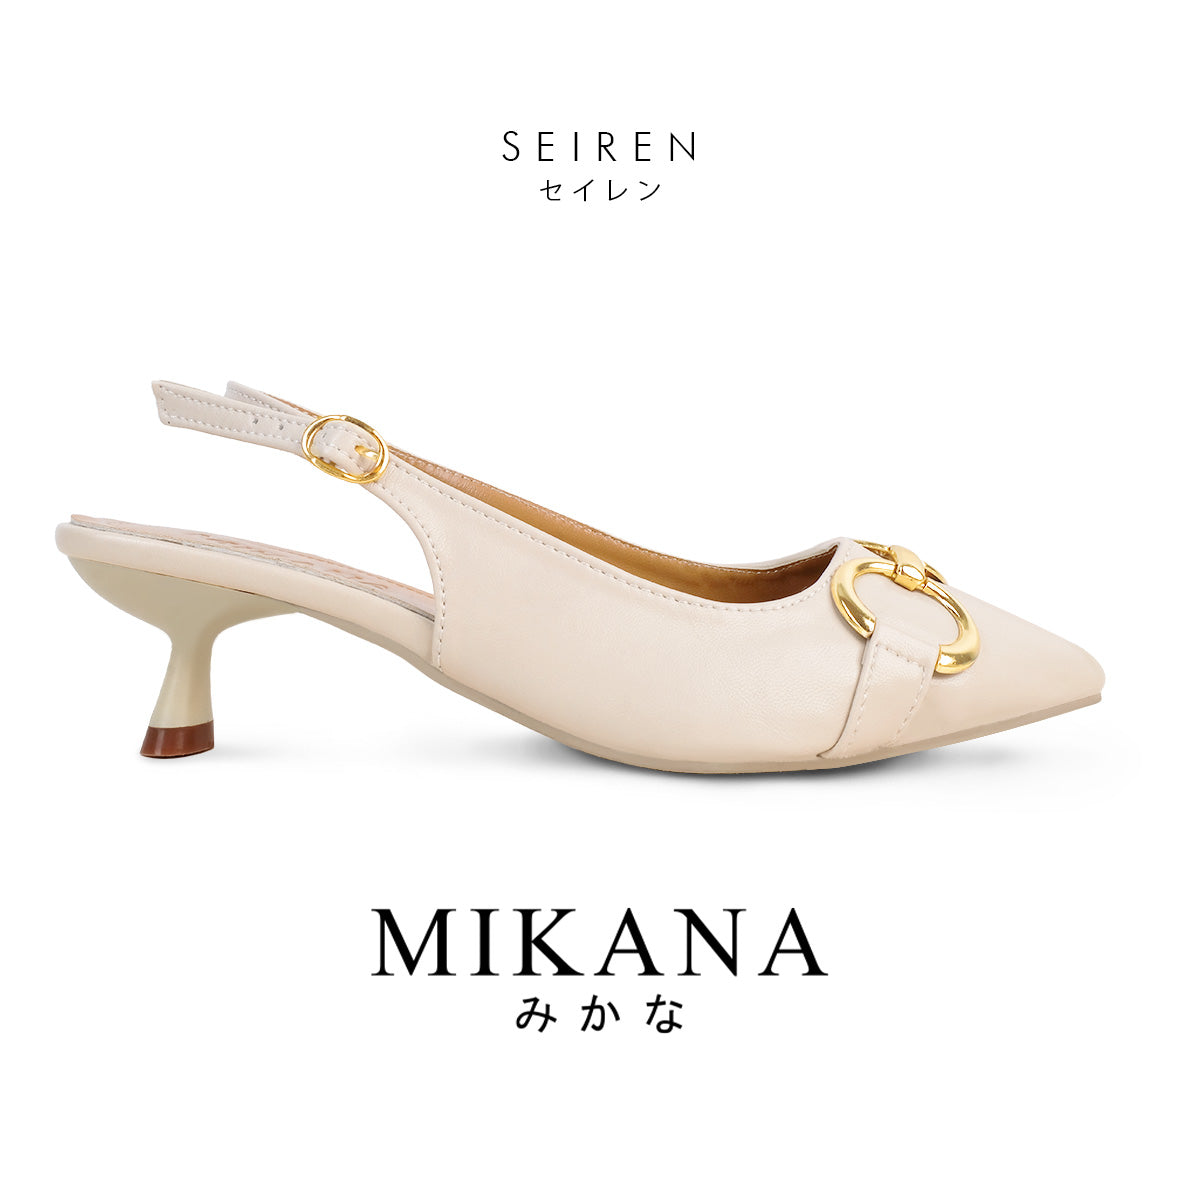 Gold Accent Seiren Pointed-Toe Slingback 2 inches Heels Sandals Shoes